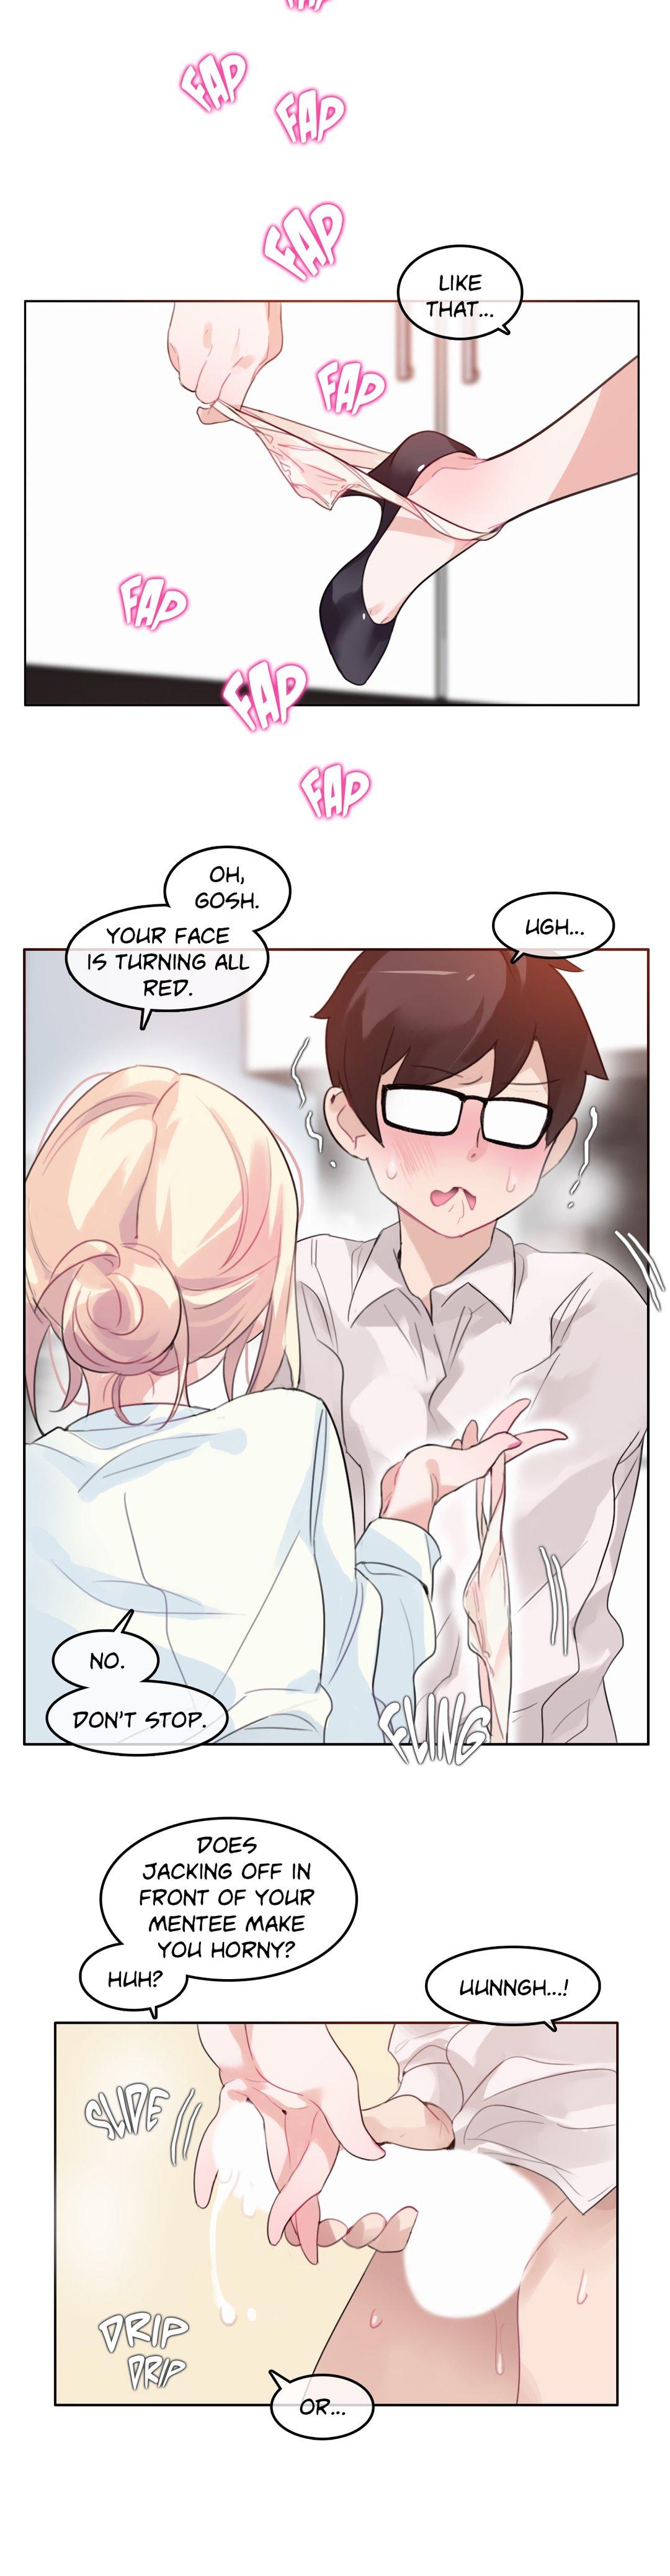 A Pervert's Daily Life Ch. 1-34 721